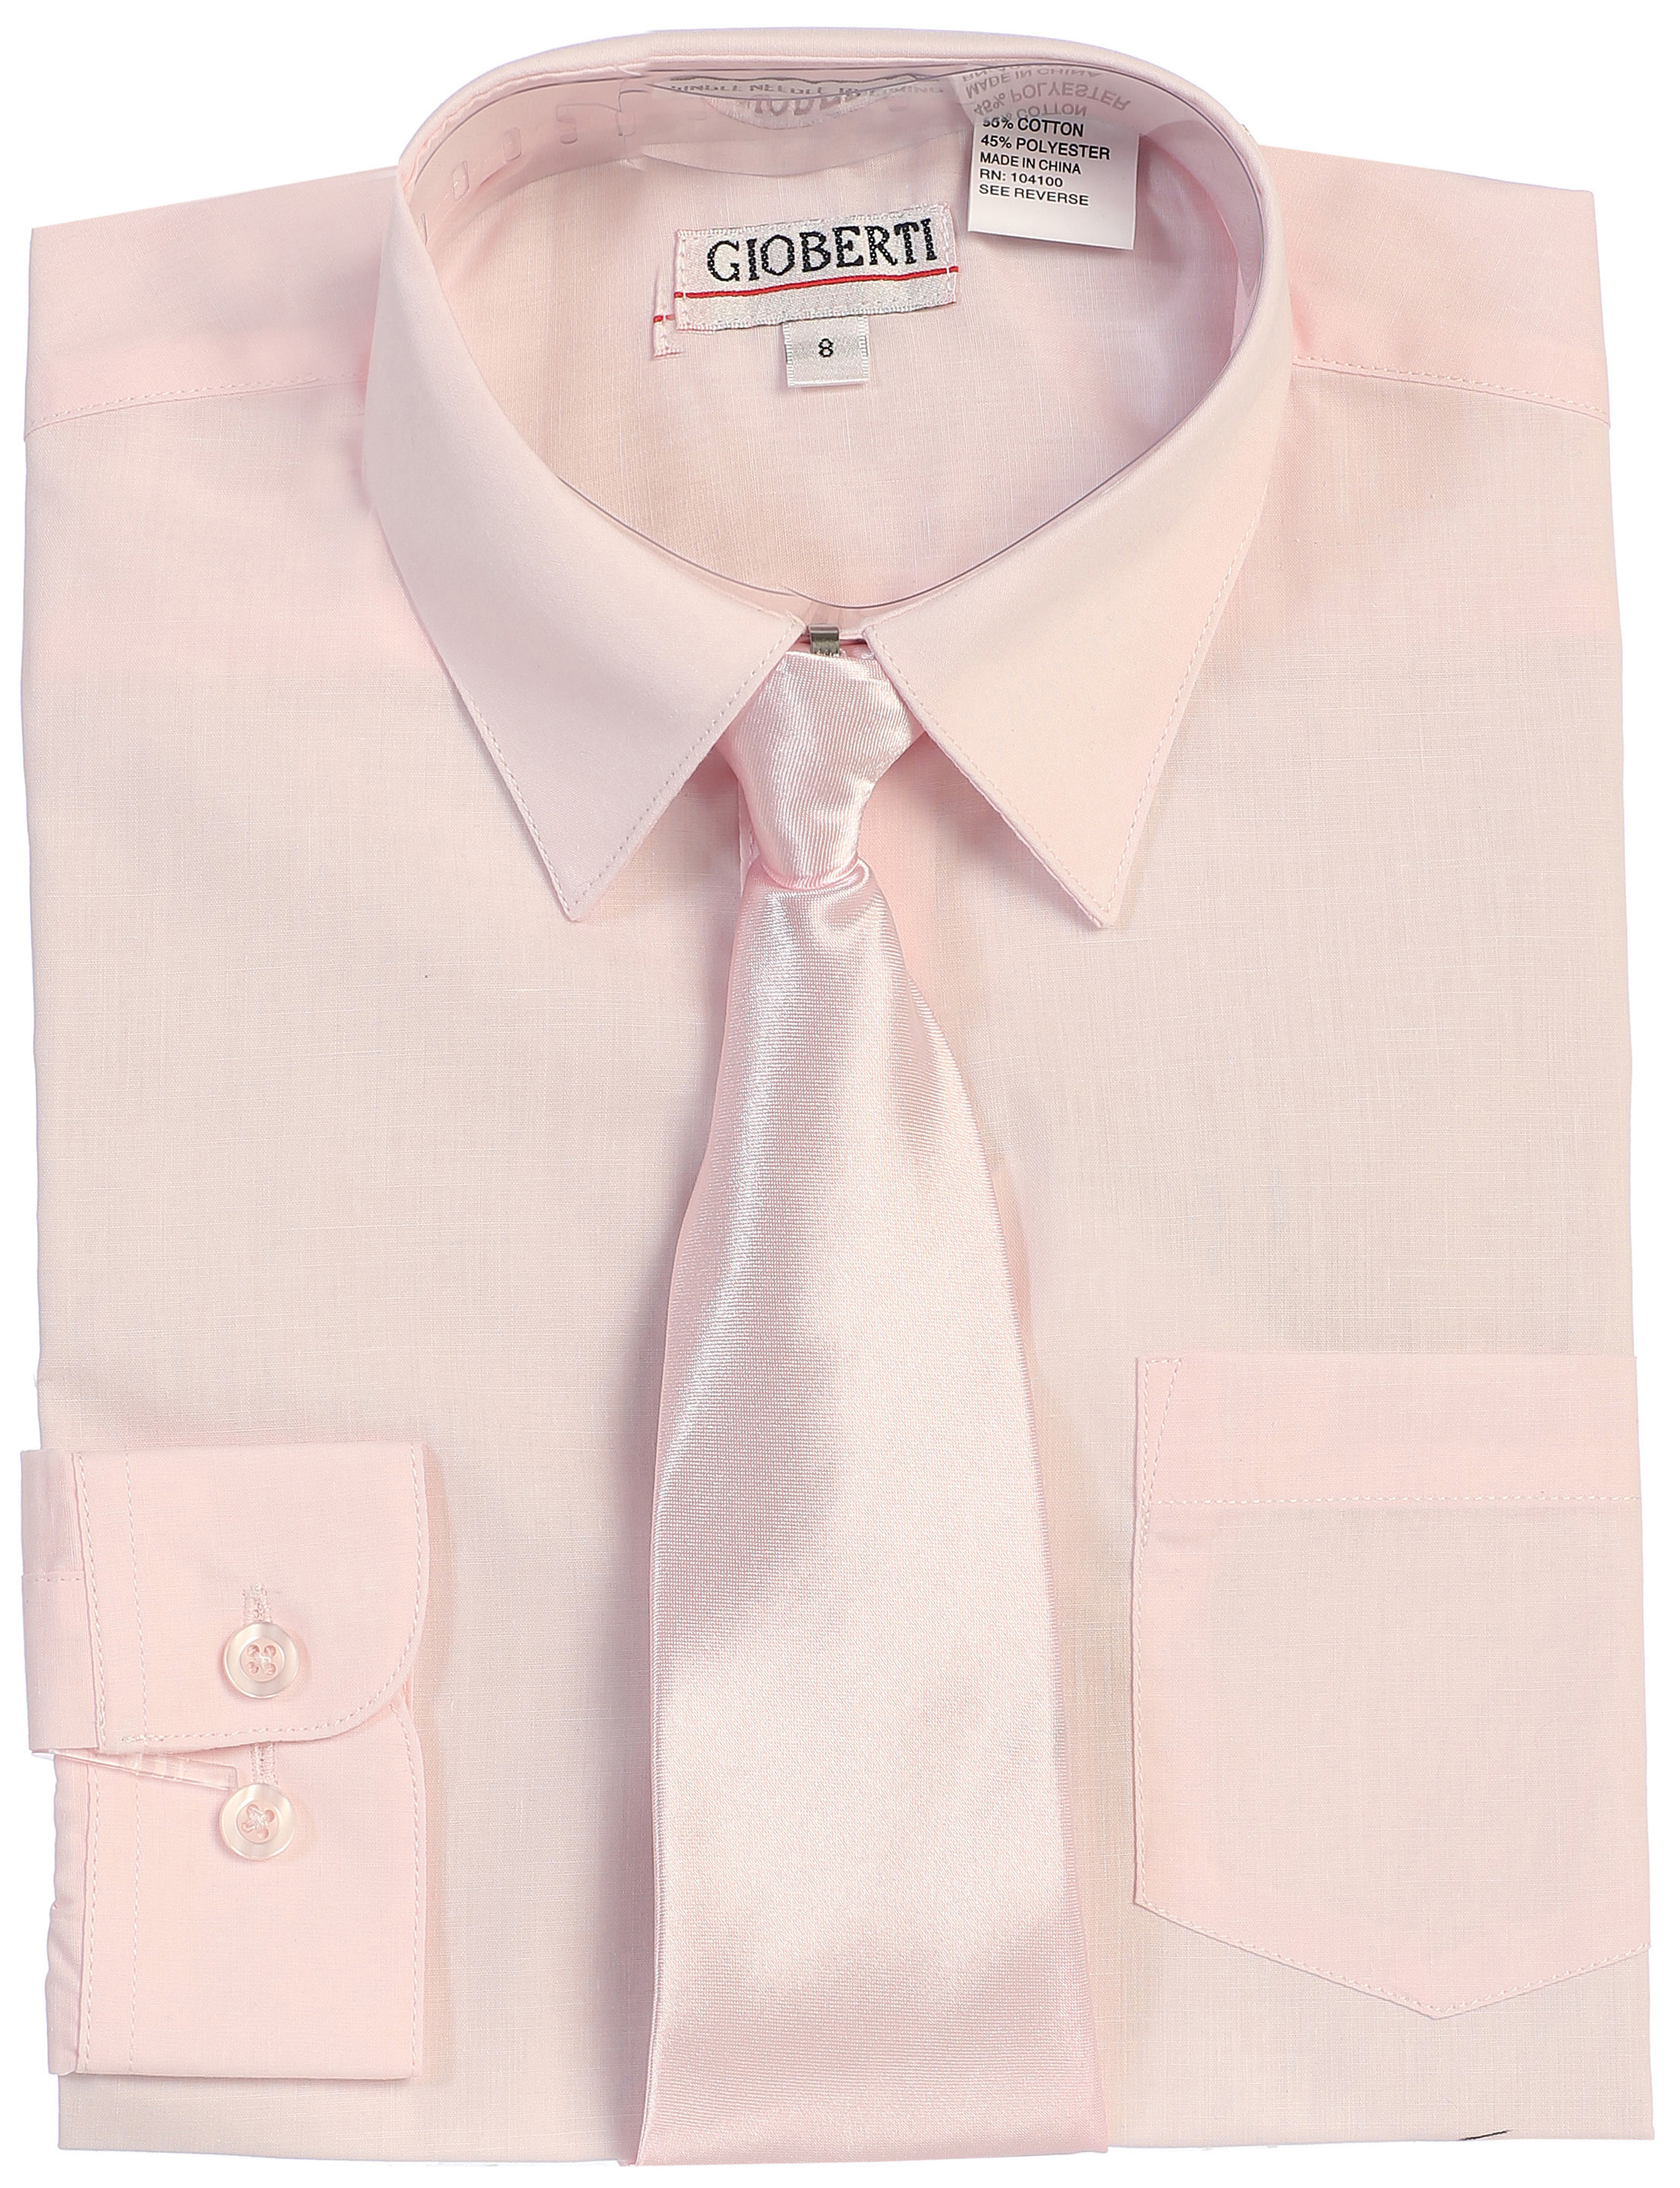 Long Sleeve Dress Shirt + SolidClip Tie 8 - 18